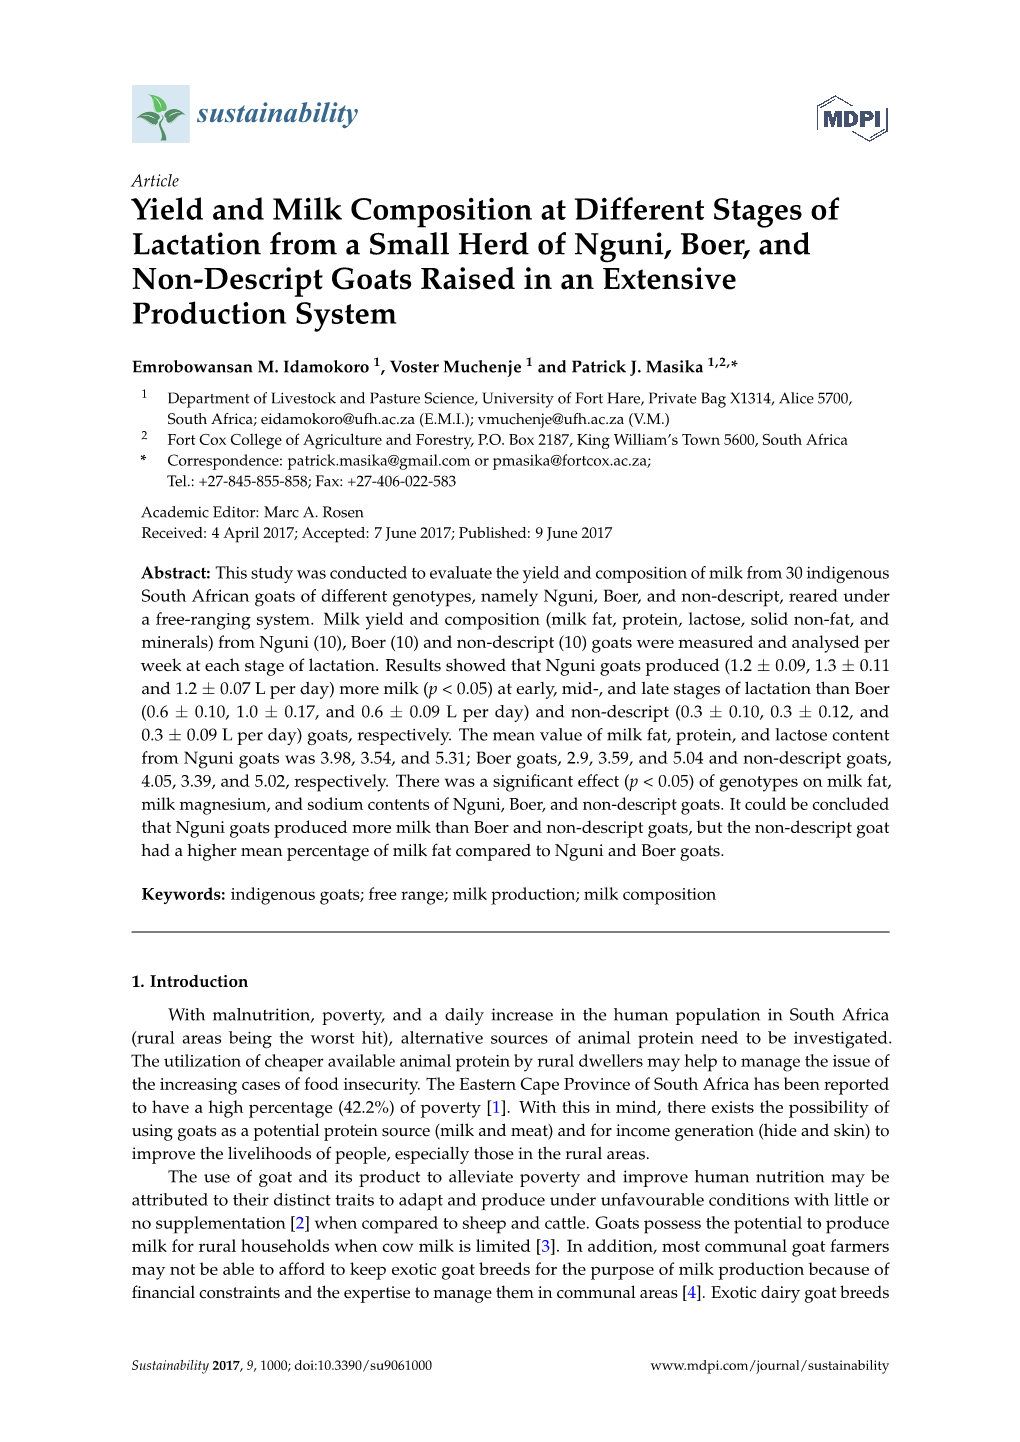 Yield And Milk Composition At Different Stages Of Lactation From A